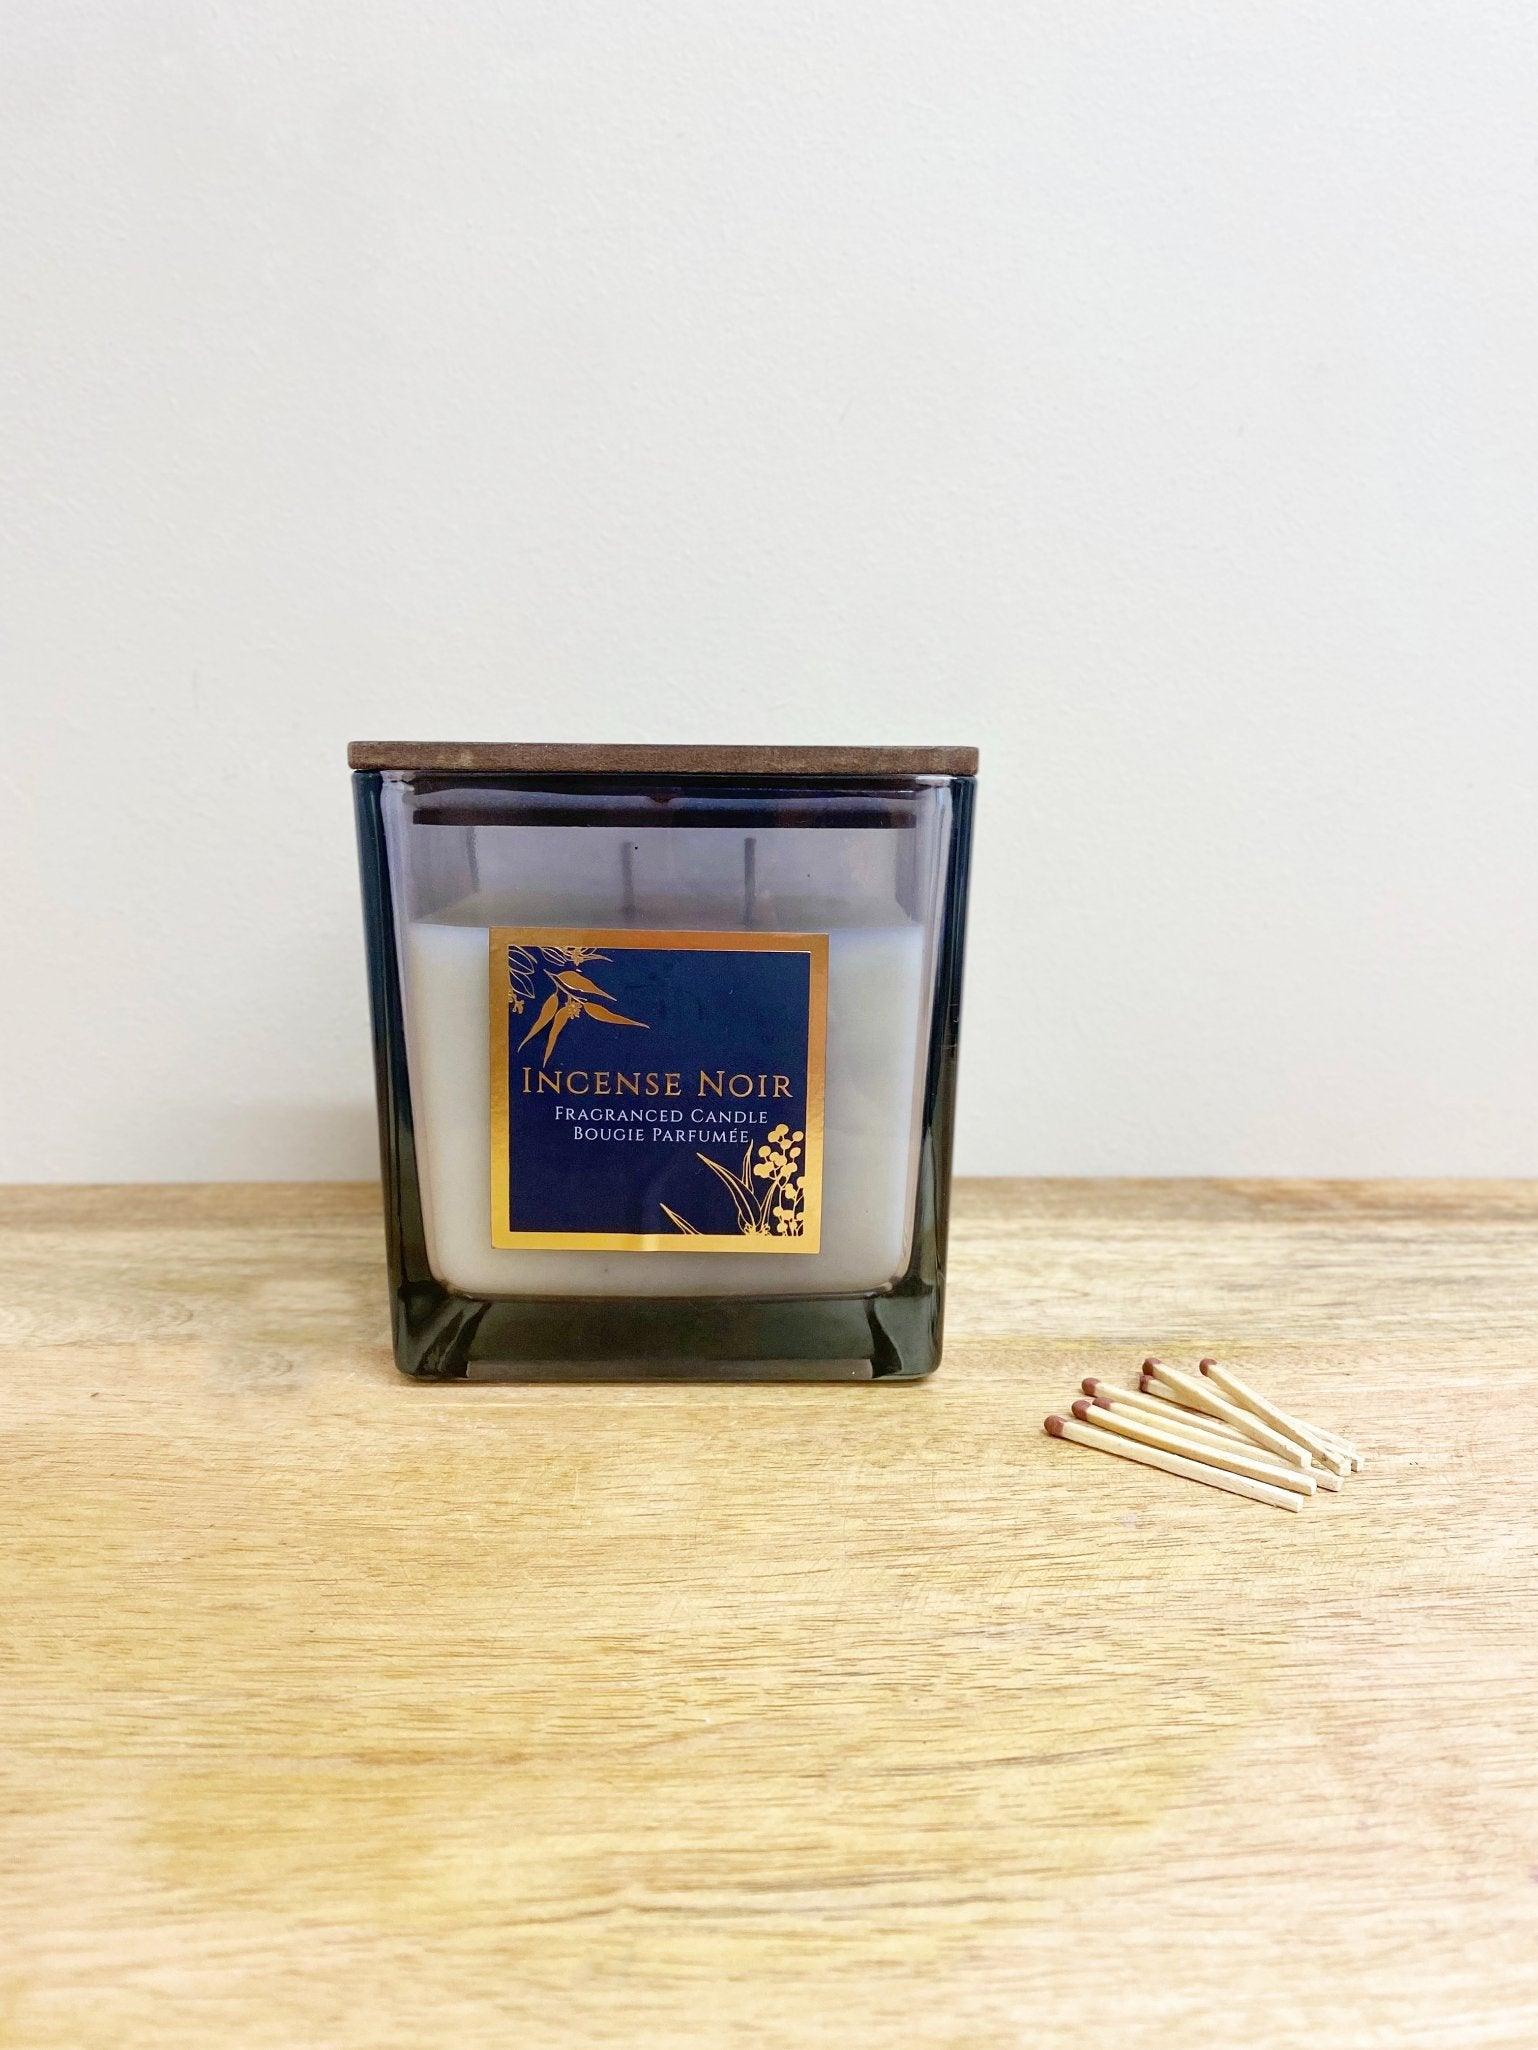 View Incense Noir Scented Candle With Wooden Lid information